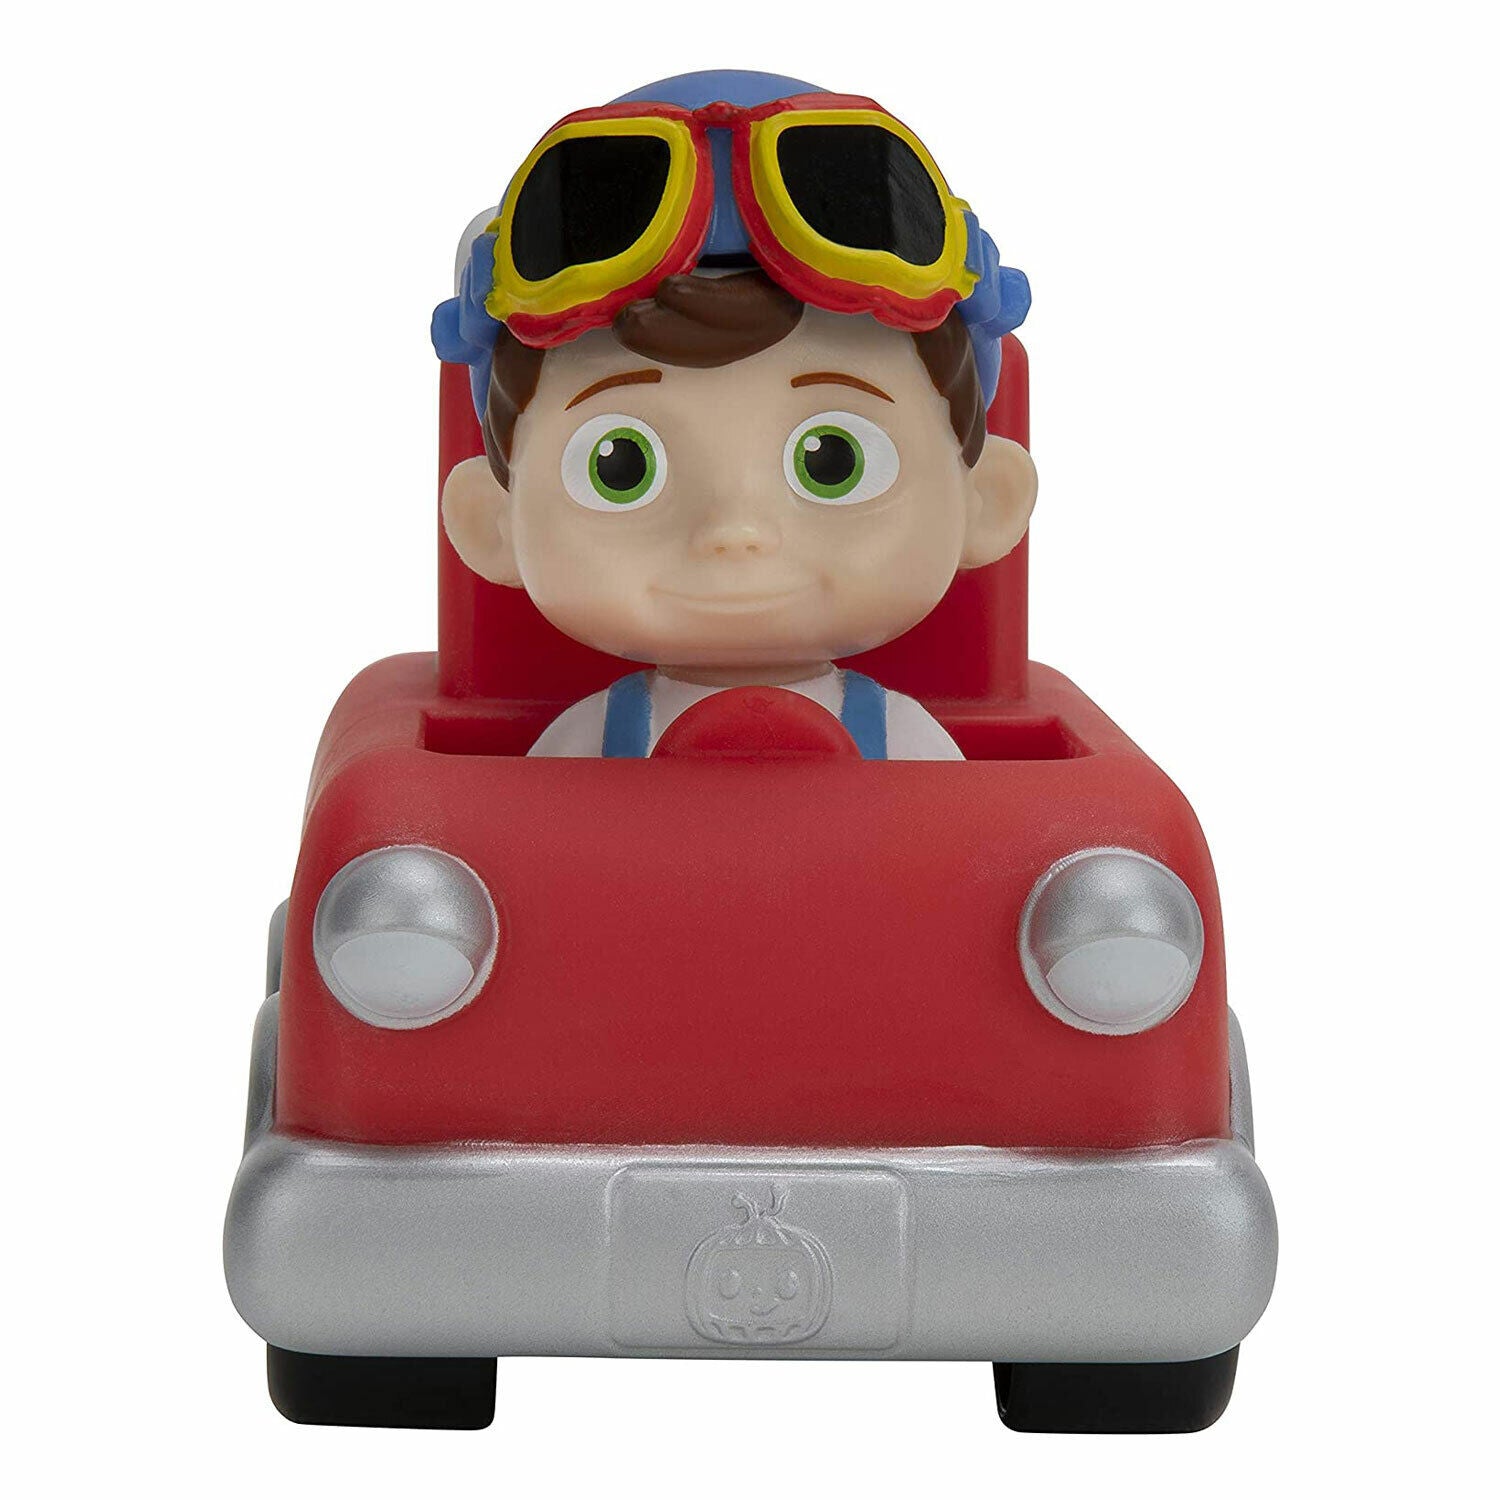 New CoComelon Mini Red Fire Truck with TomTom - Perfect for Kids!